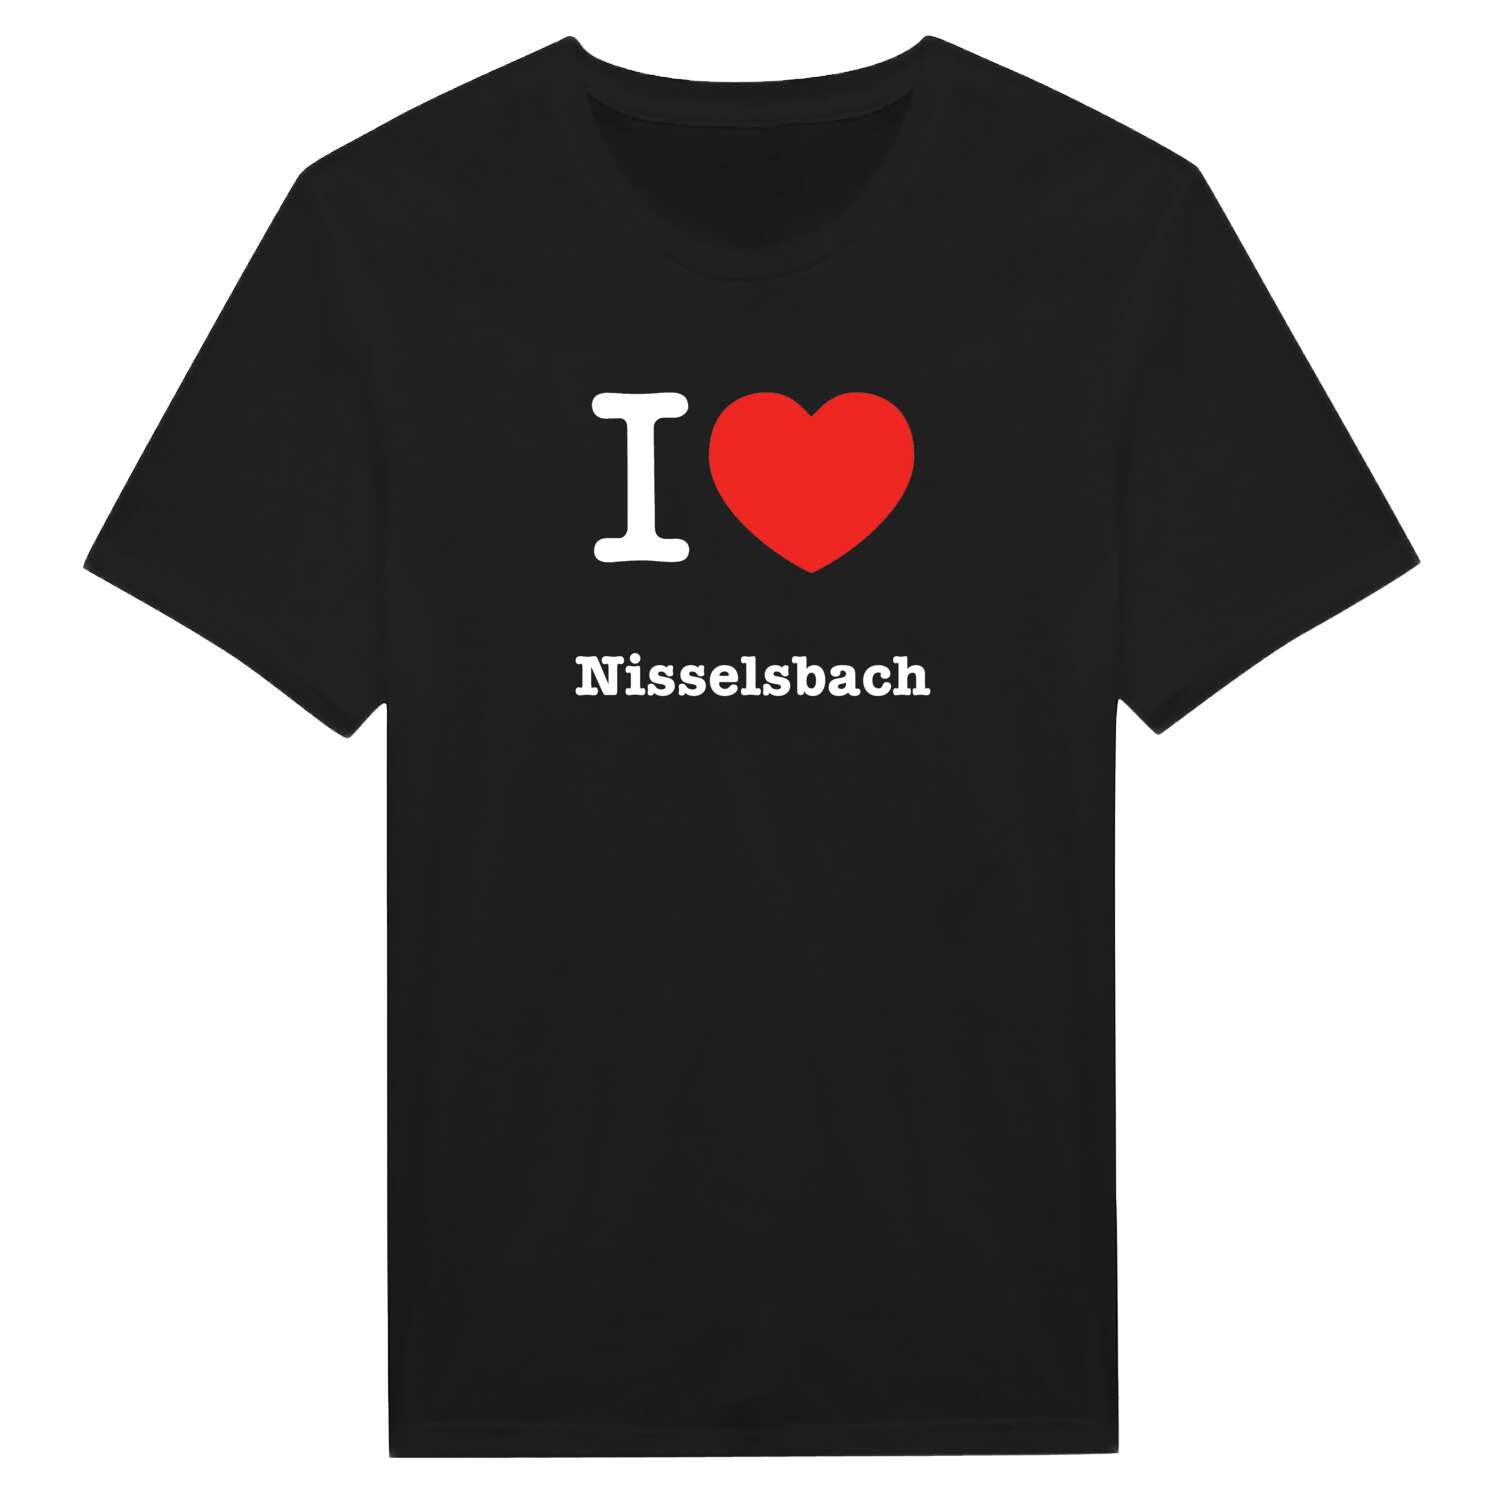 Nisselsbach T-Shirt »I love«